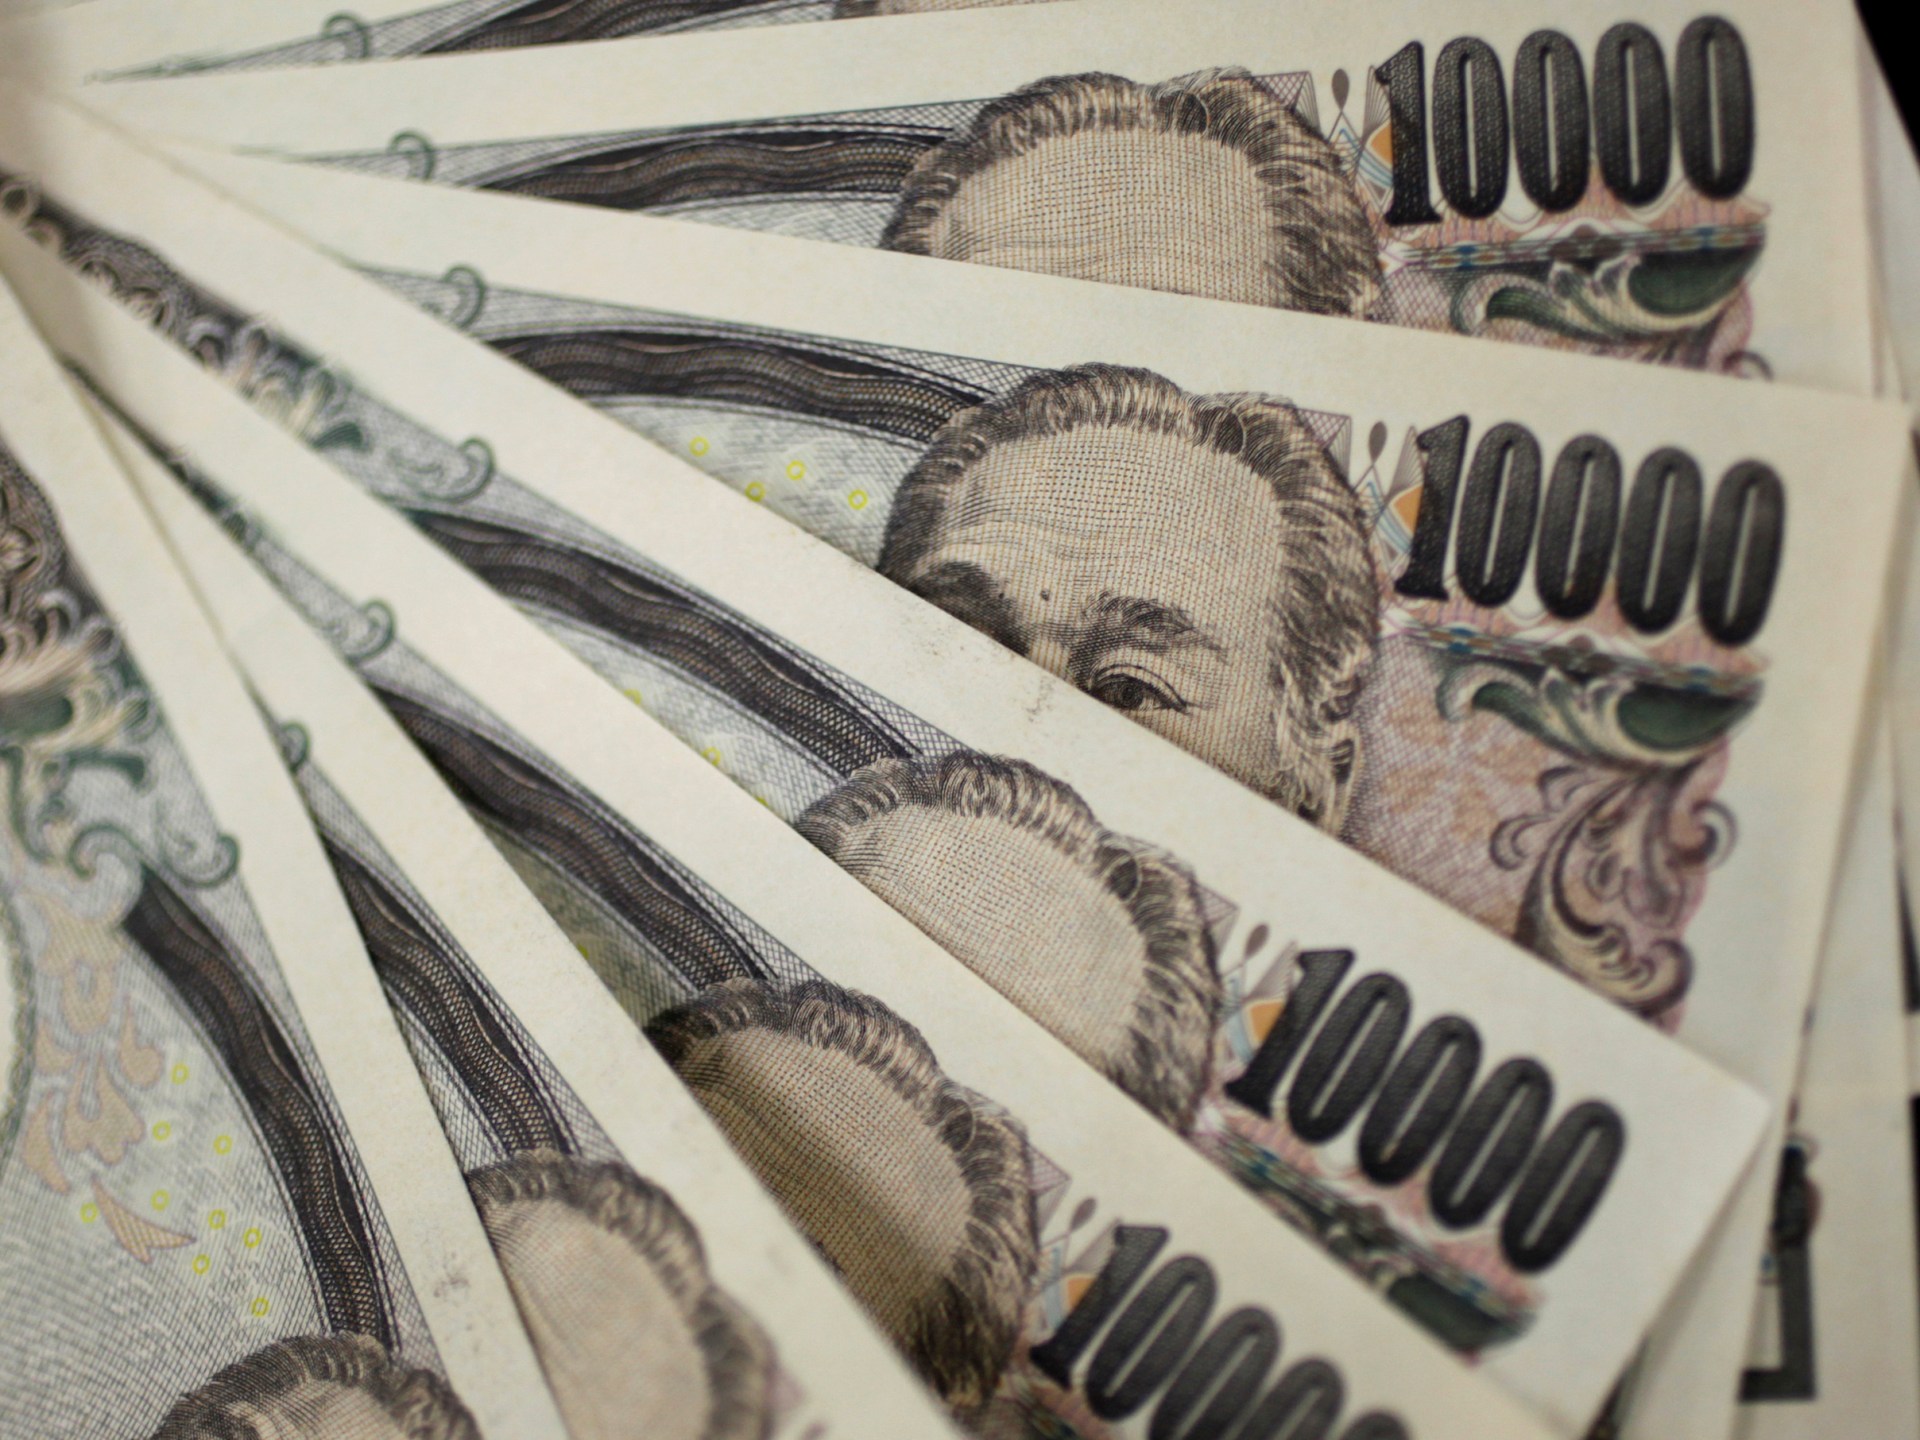 Japan’s Yen Reaches 34-Year Low Against US Dollar: How Japanese Authorities Are Trying to Stabilize It